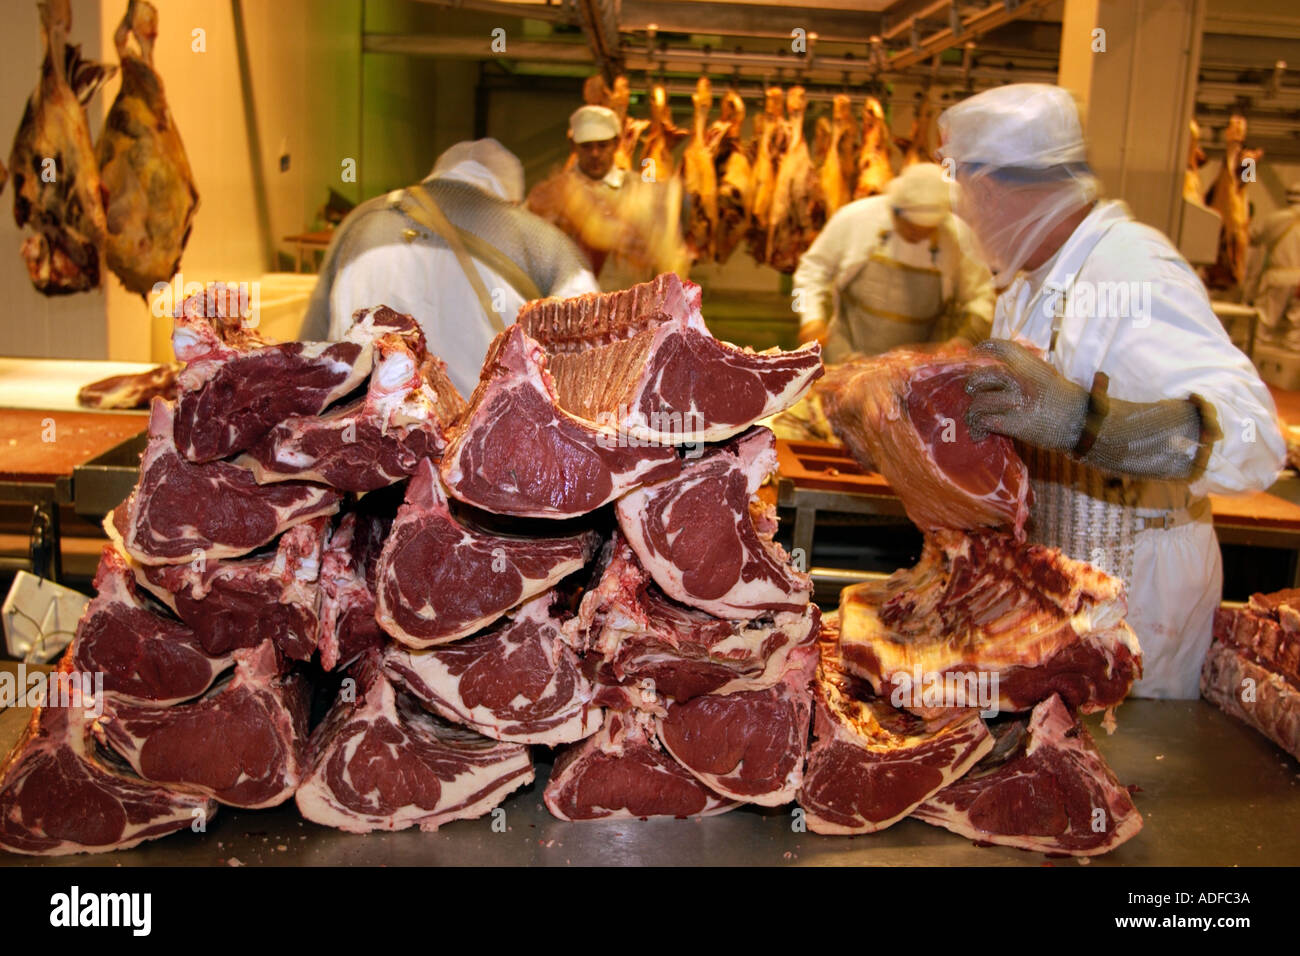 Processing Welsh Beef carcasses at St Merryn Foods abattoir Merthyr Tydfil South Wales UK Stock Photo